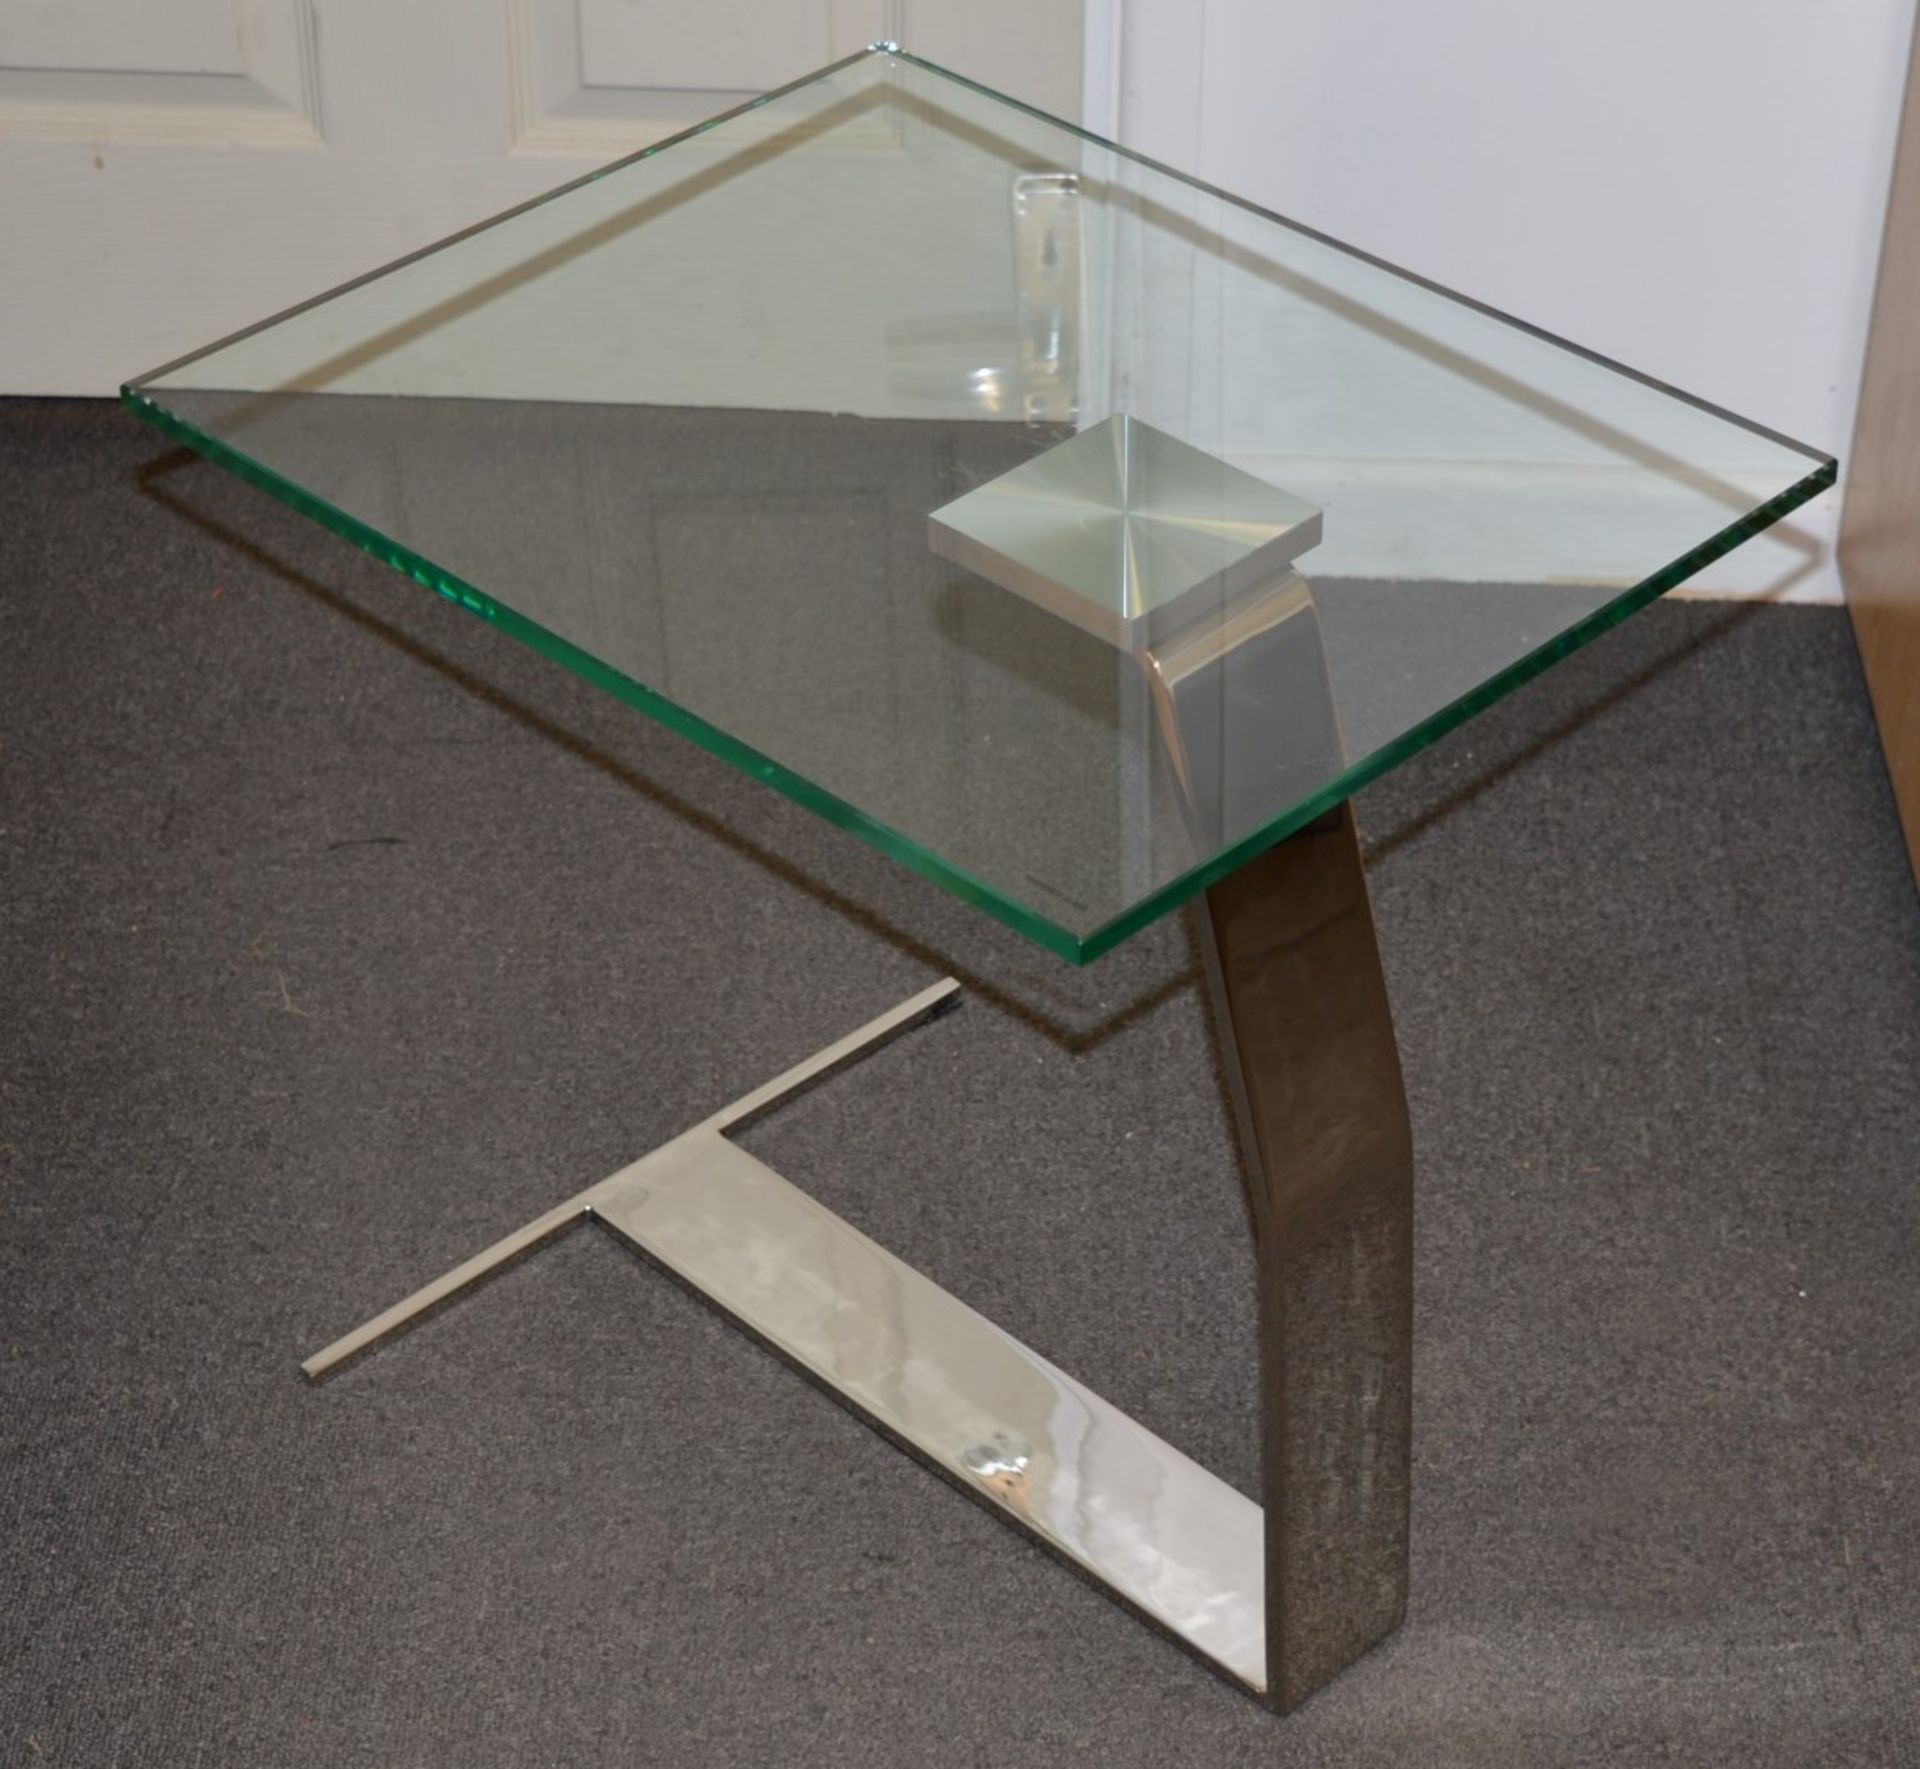 1 x Designer Chelsom Lamp Table - CL081 - Chrome Base With Clear Tempered Glass Top - Stunning - Image 5 of 6